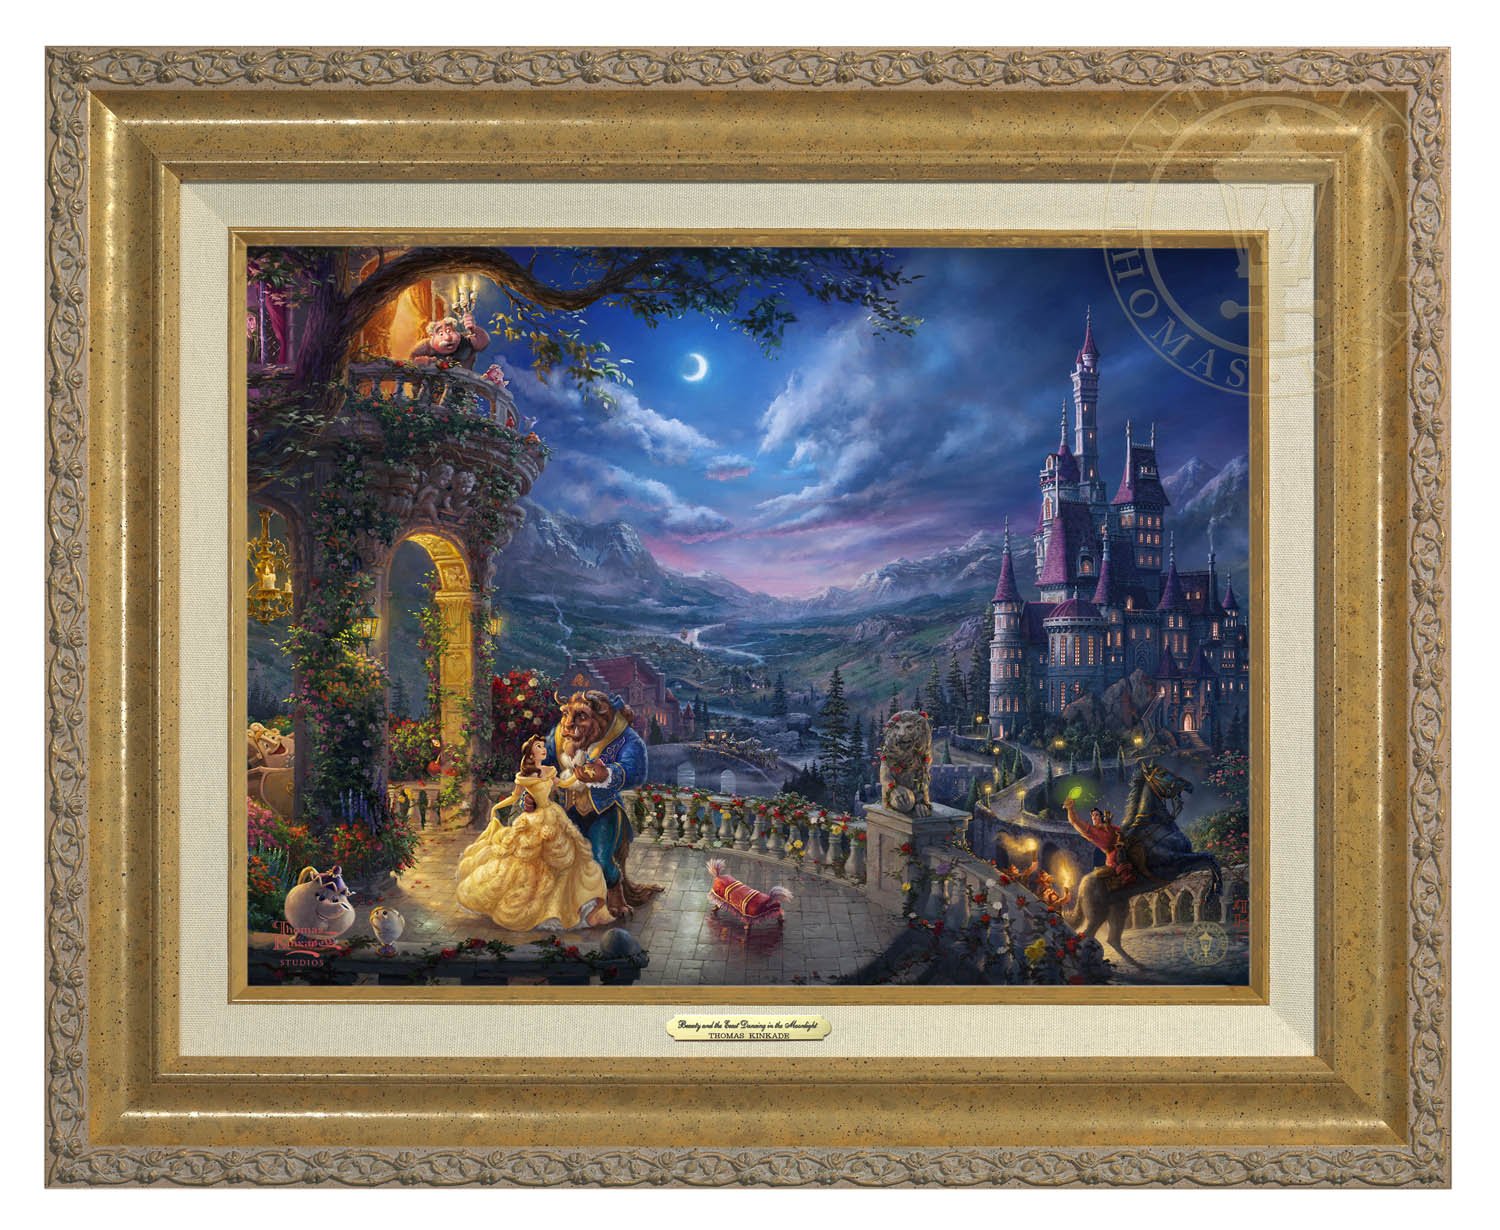 Belle and the Beast celebrate their love under the dreamy moonlit sky, with all their friend enjoying the moments - Antique Gold Frame